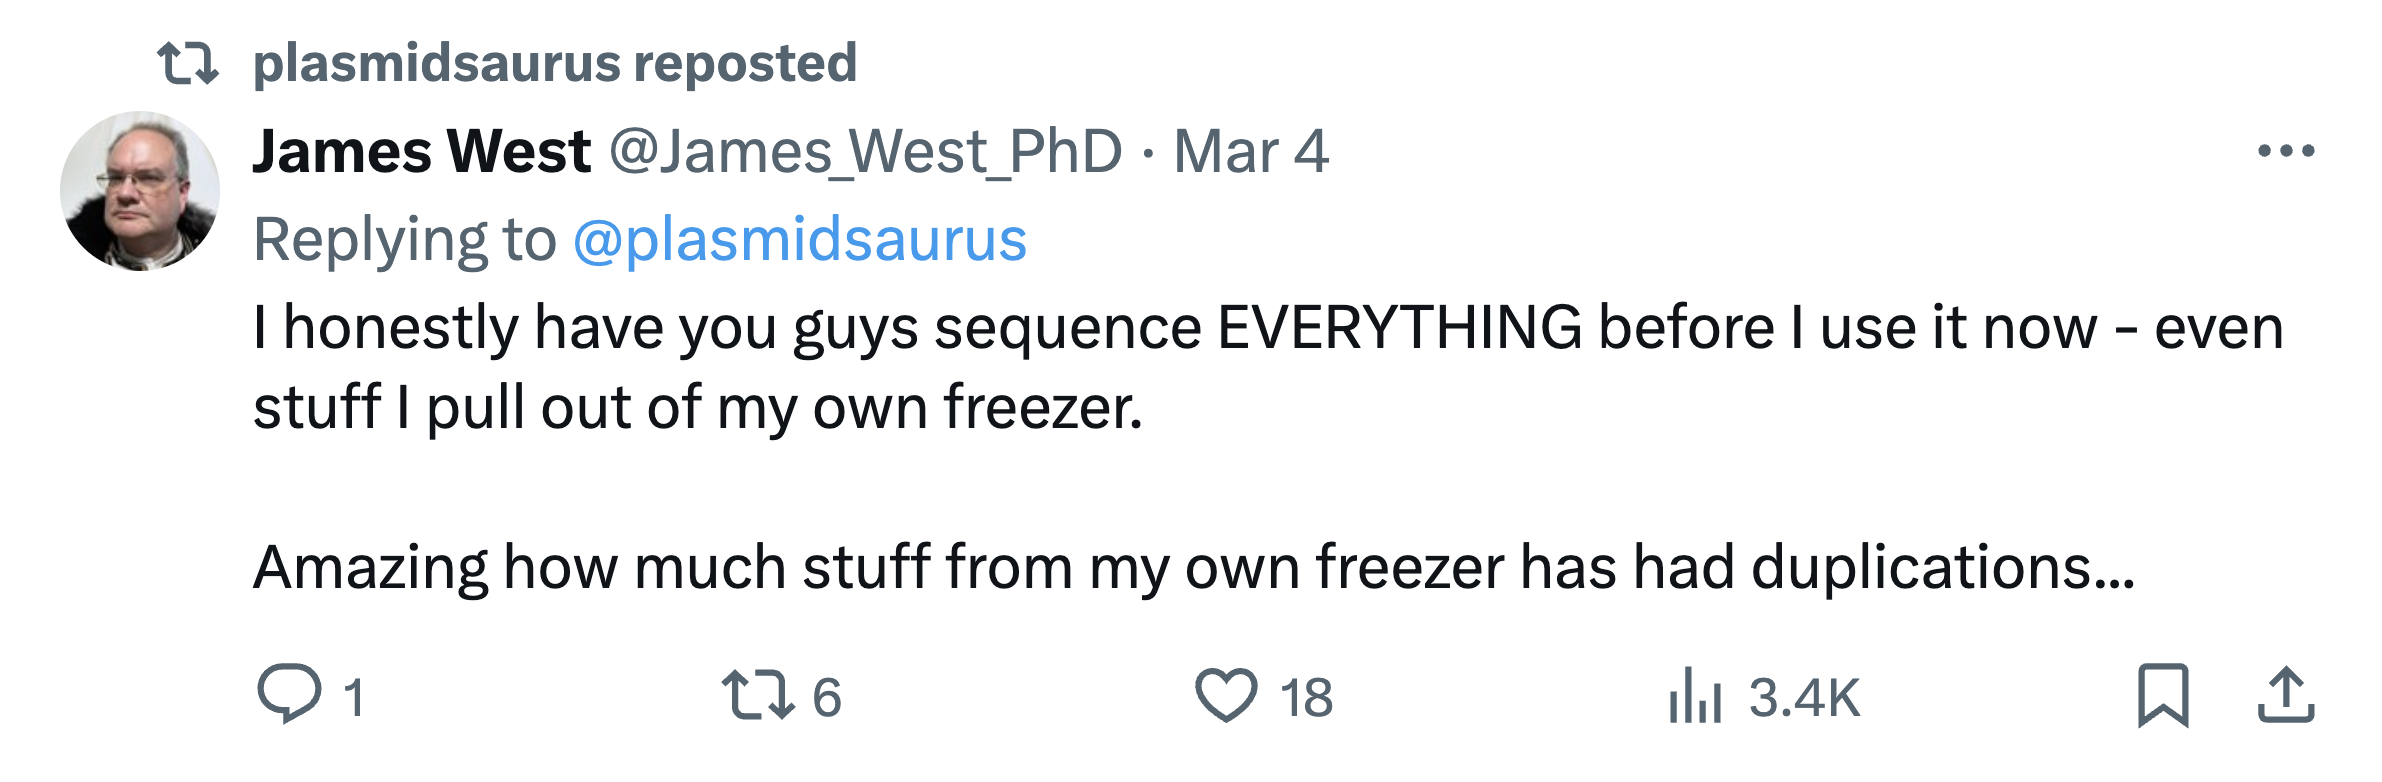 I honestly have you guys sequence EVERYTHING before I use it now - even stuff I pull out of my own freezer. Amazing how much stuff from my own freezer has duplications... — James West PhD (@James_West_PhD), Mar 4, 2024